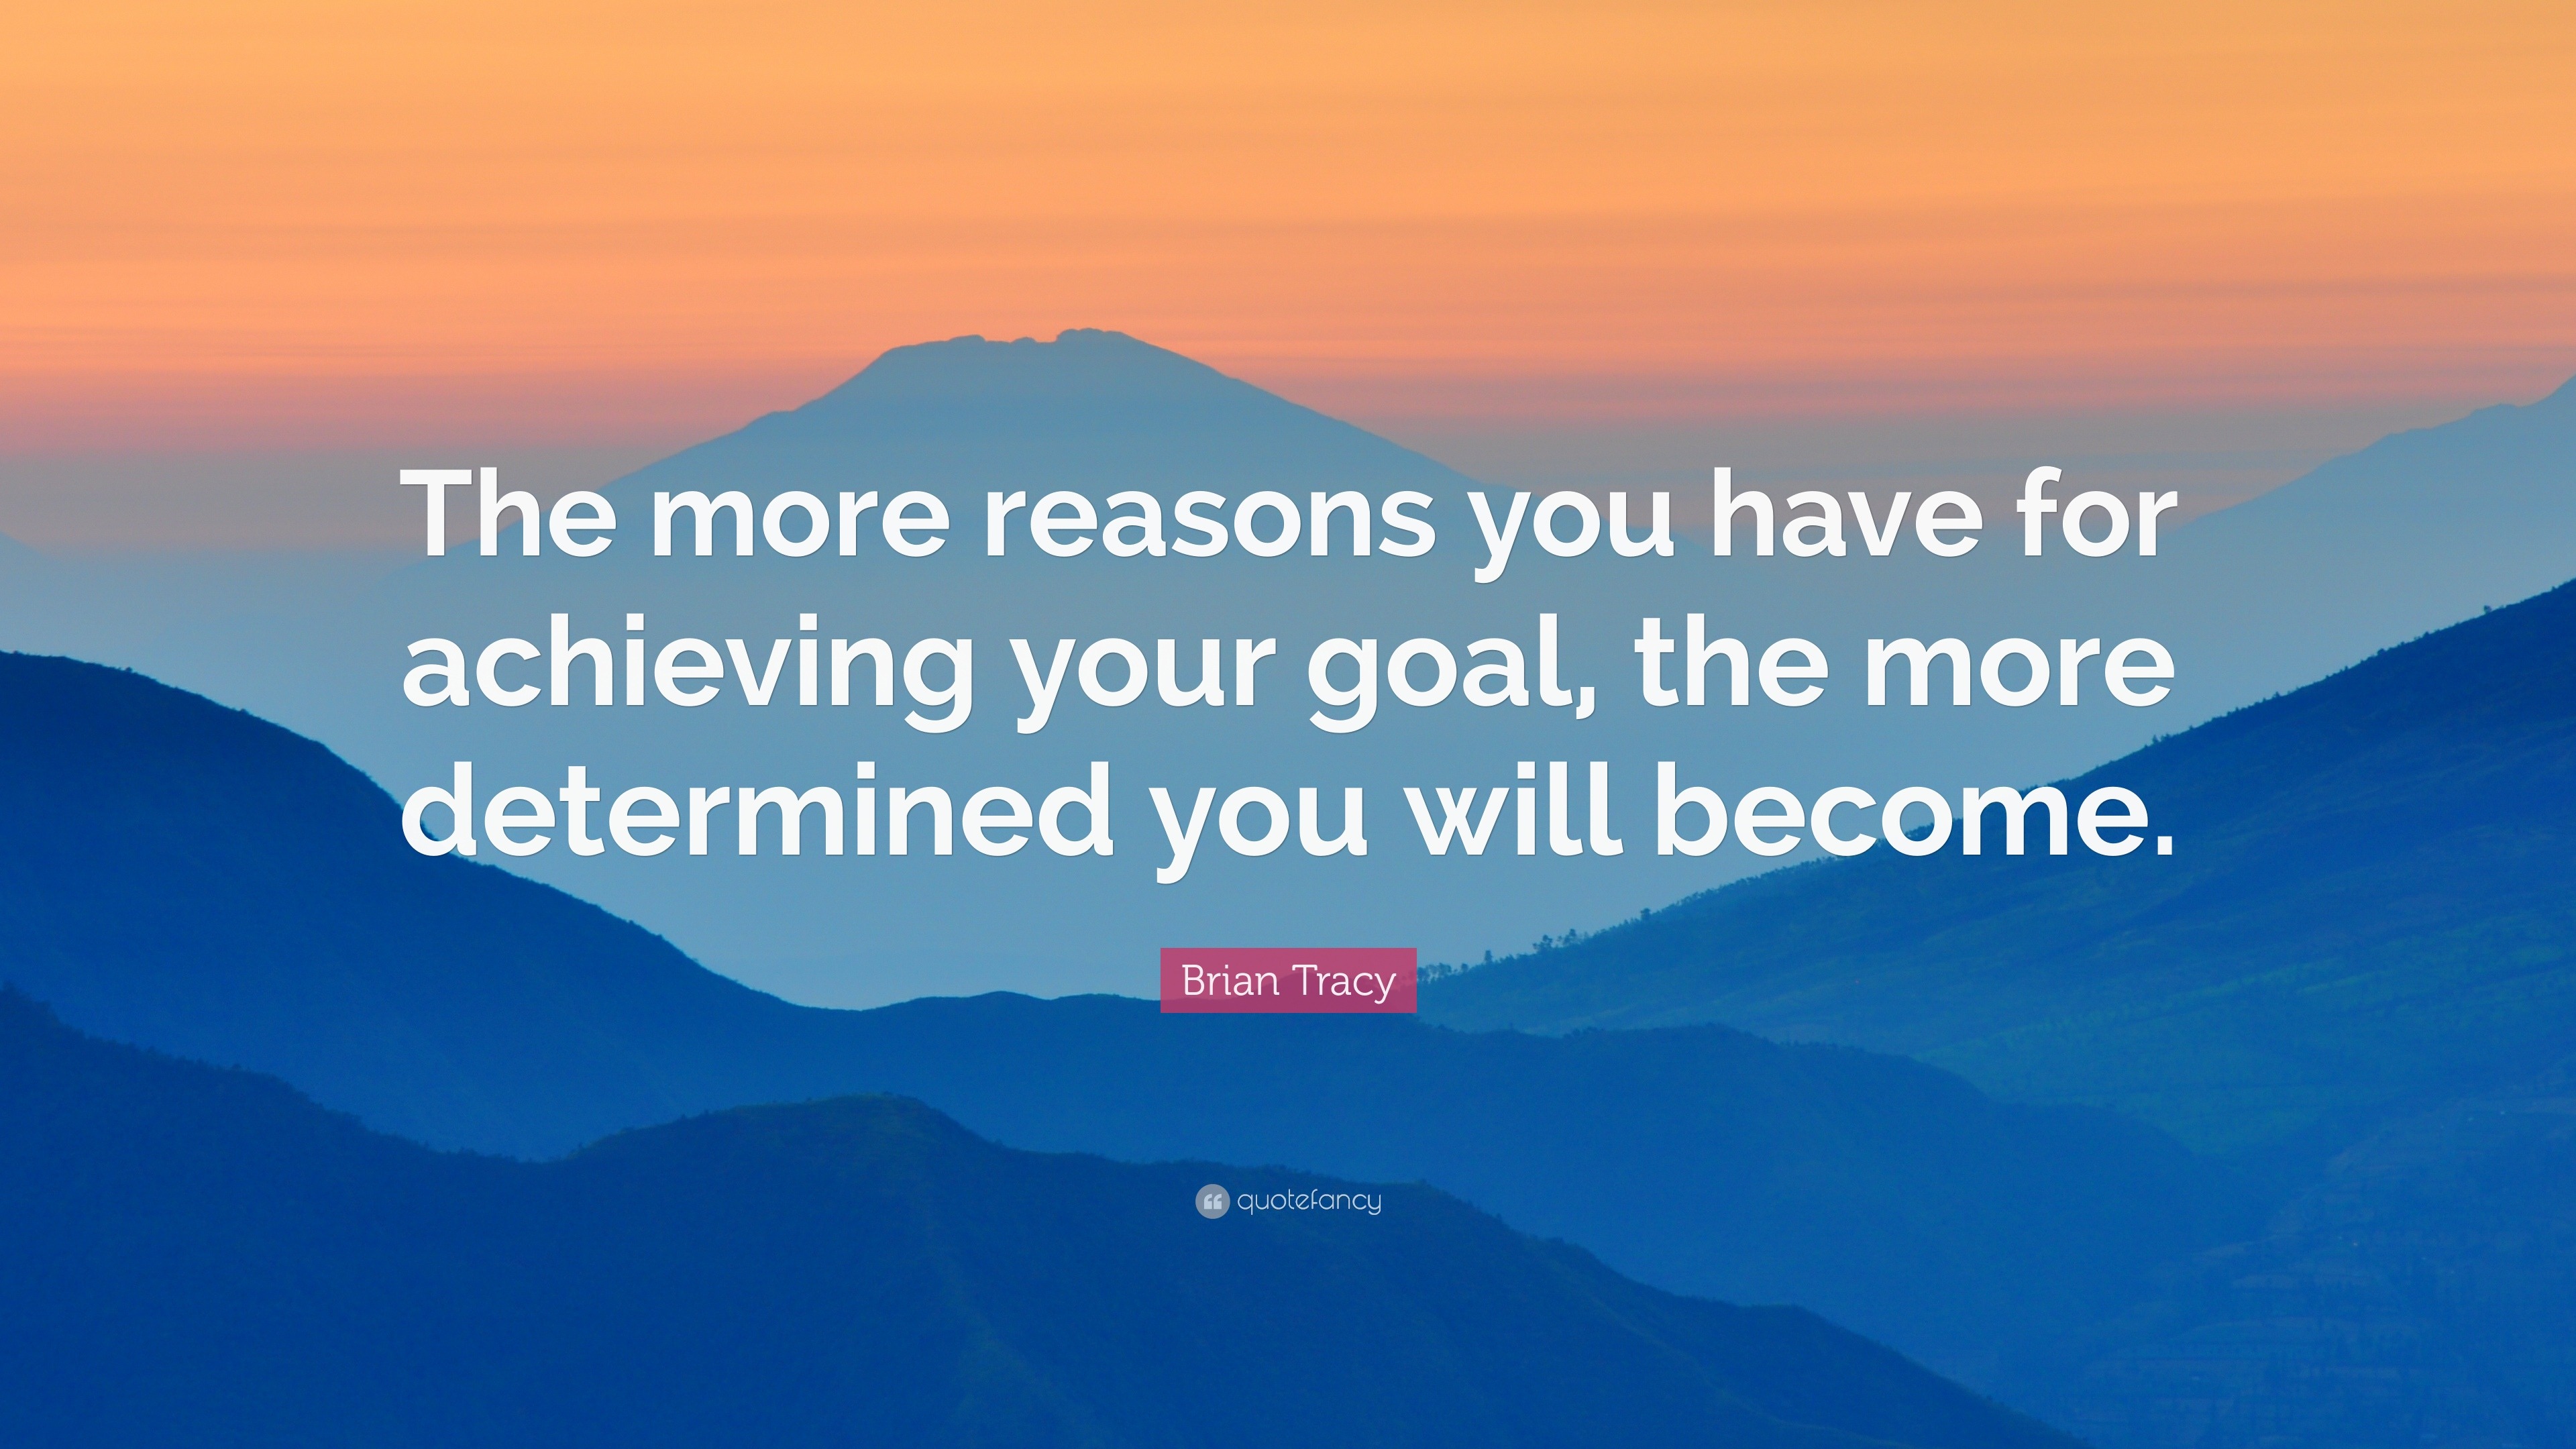 Brian Tracy Quote: “The more reasons you have for achieving your goal ...